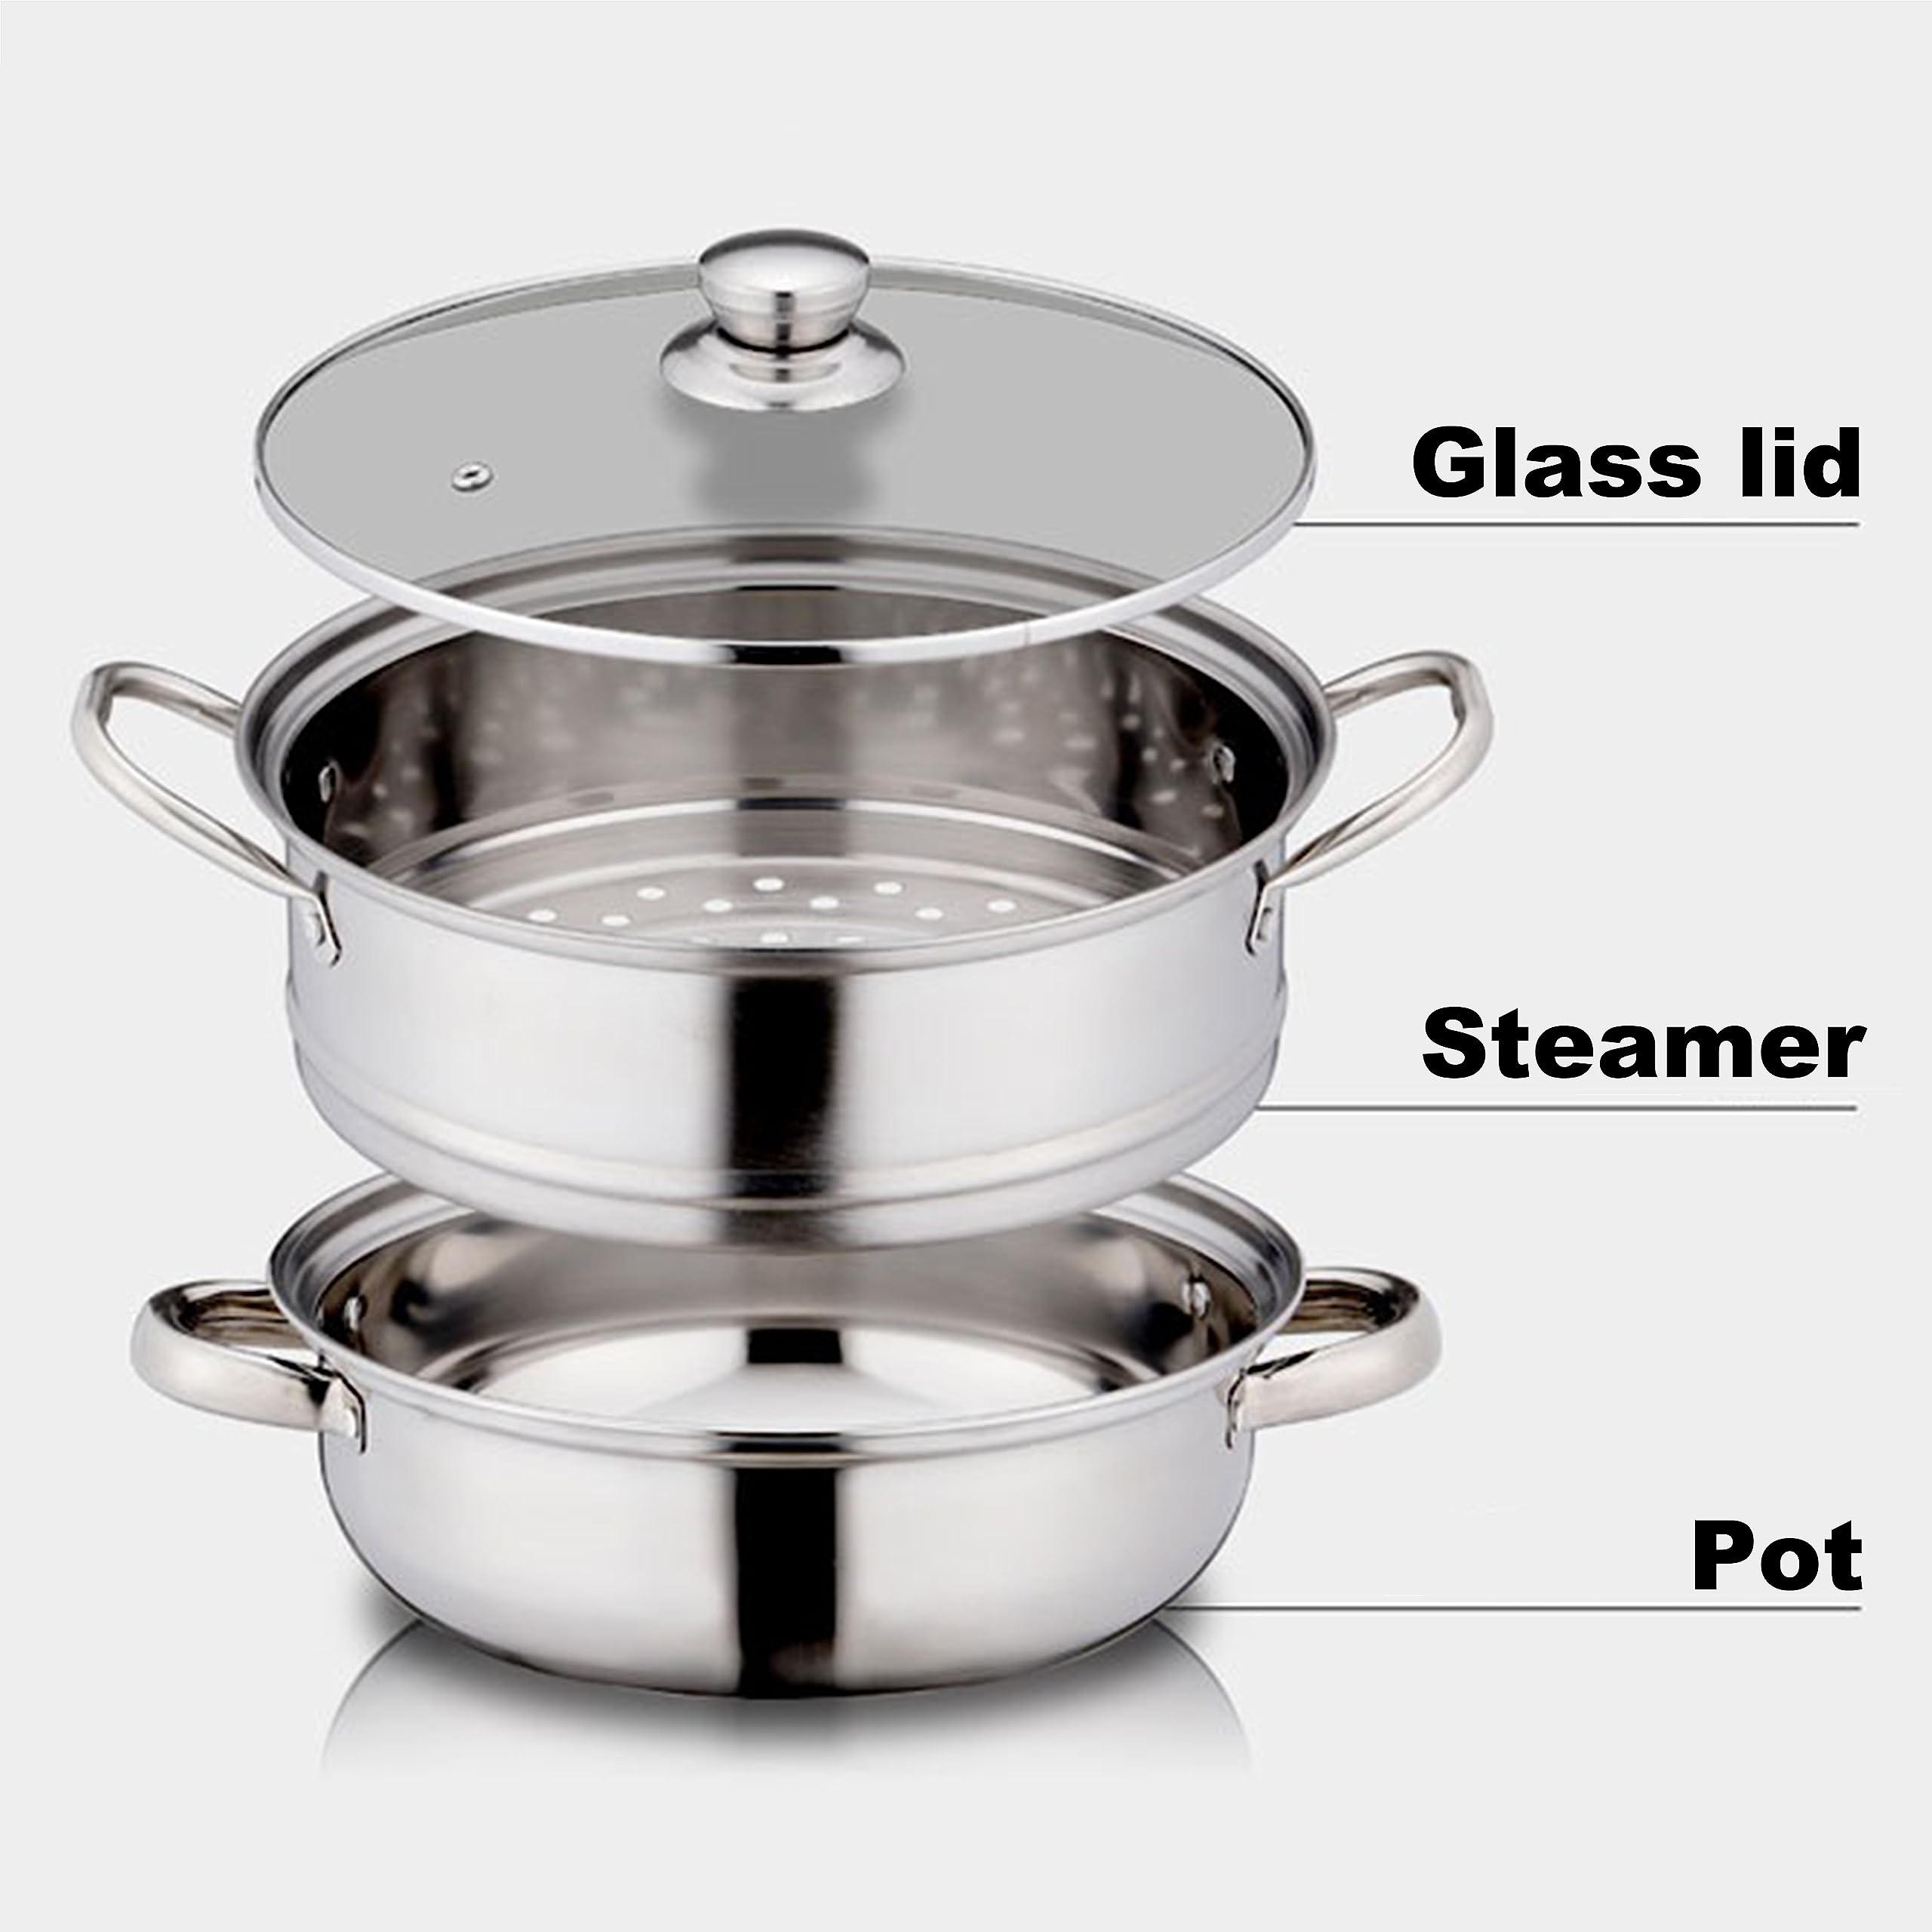 Jovely Dio Bacco 10.6"(27cm) Stainless Steel Steamer Pot Set for Cooking with 14"(35cm) Reusable Natural Pure Round Cotton Steamer Liner, 2 Quart Steamer Insert and Glass Vented Lid - 3 Piece Pack